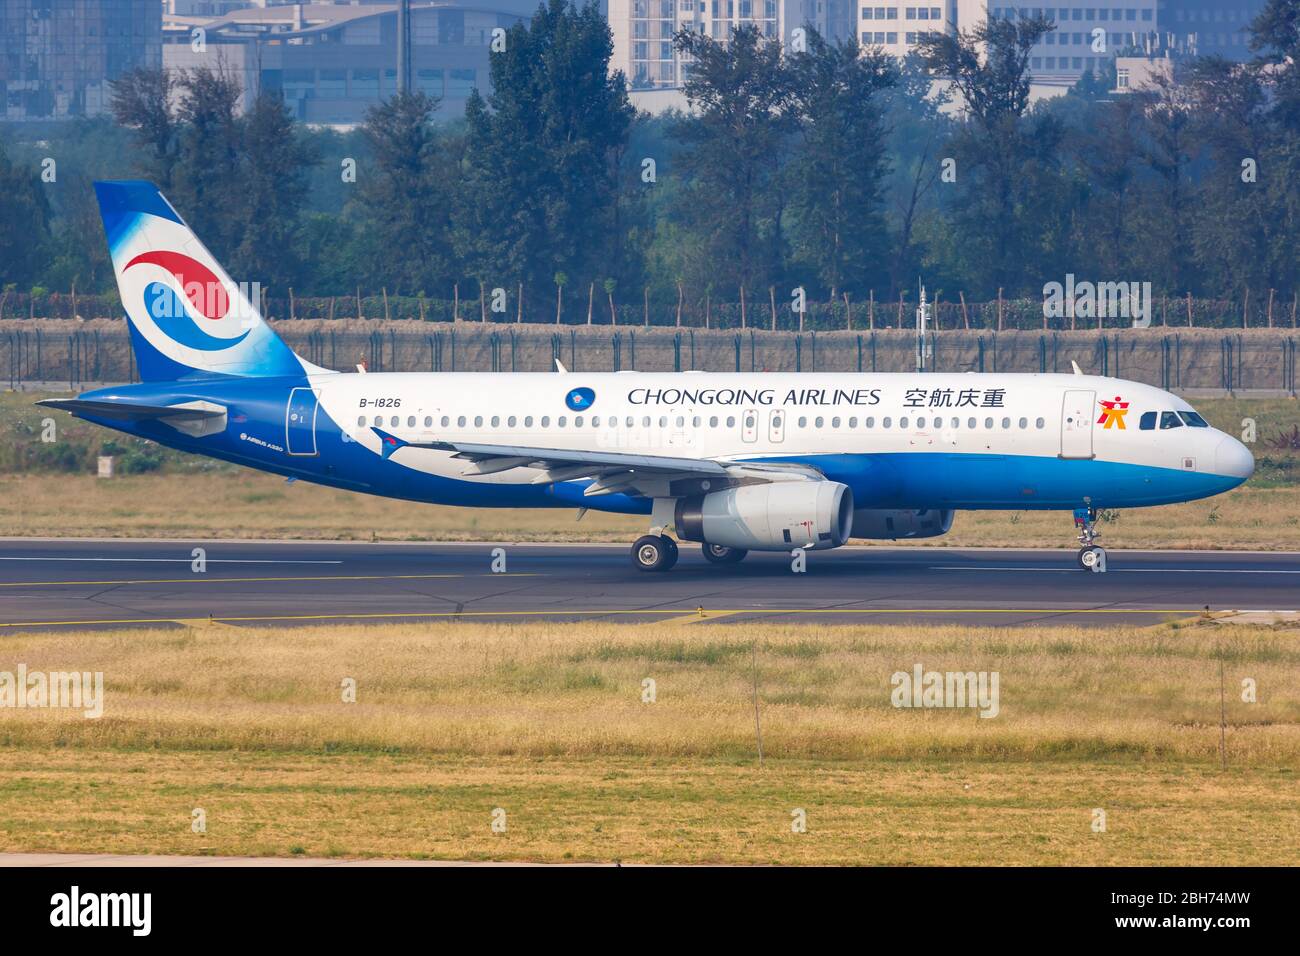 Beijing, China – October 2, 2019: Chongqing Airlines Airbus A320 airplane at Beijing airport (PEK) in China. Stock Photo